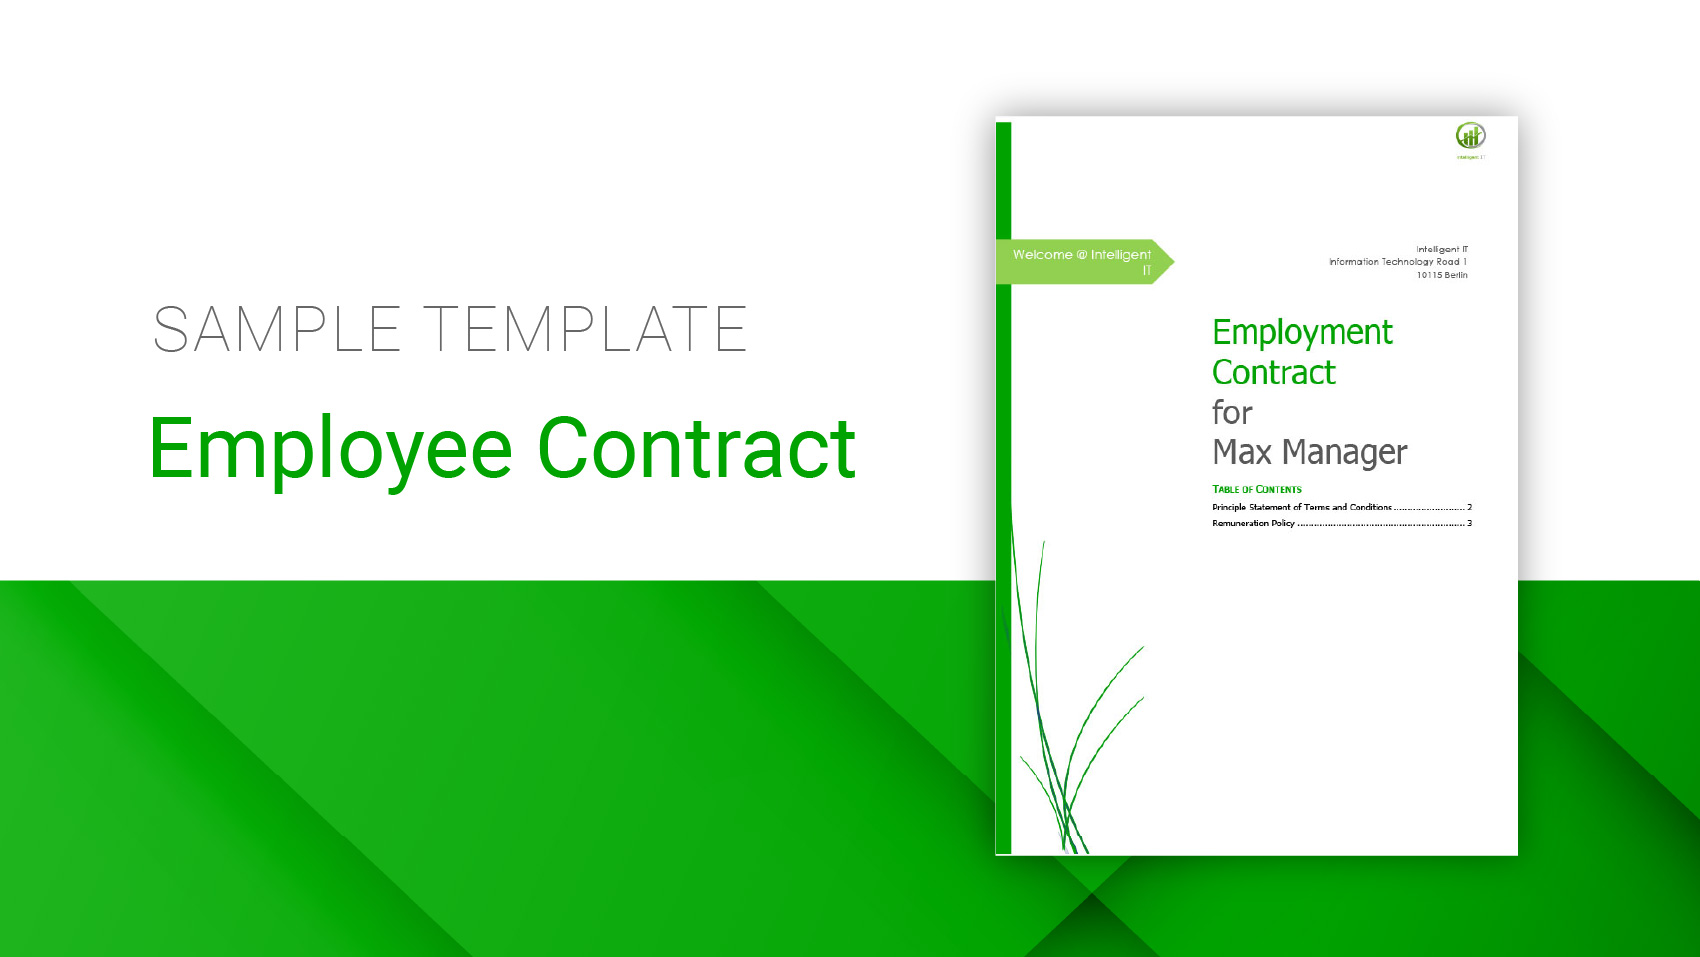 Employee Contract  |  Level: First-time user